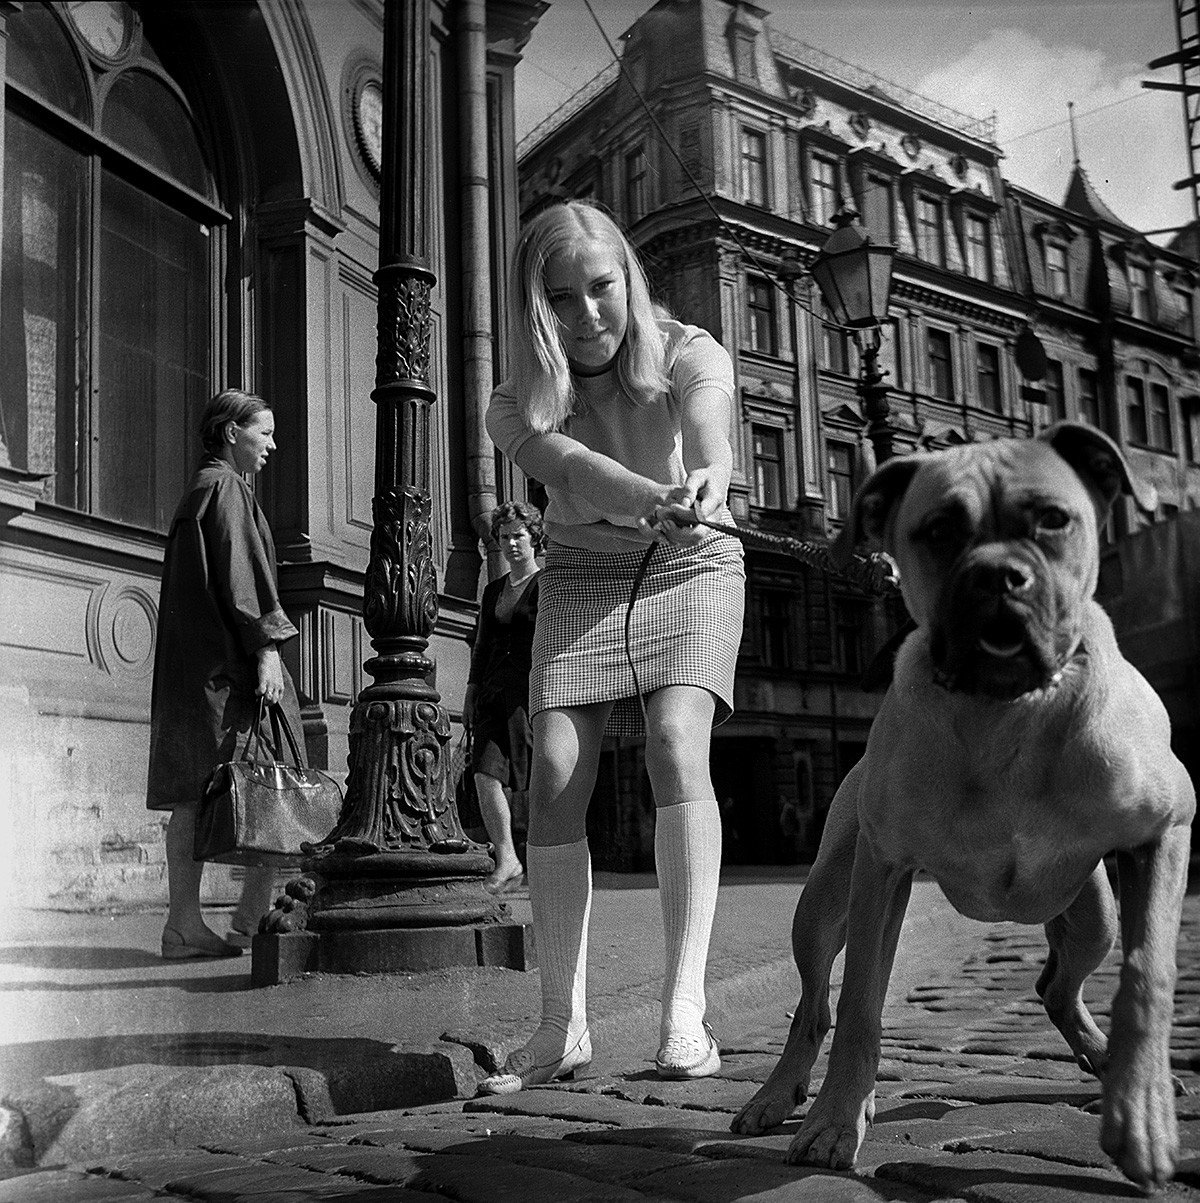 In the streets of central Riga, 1968.